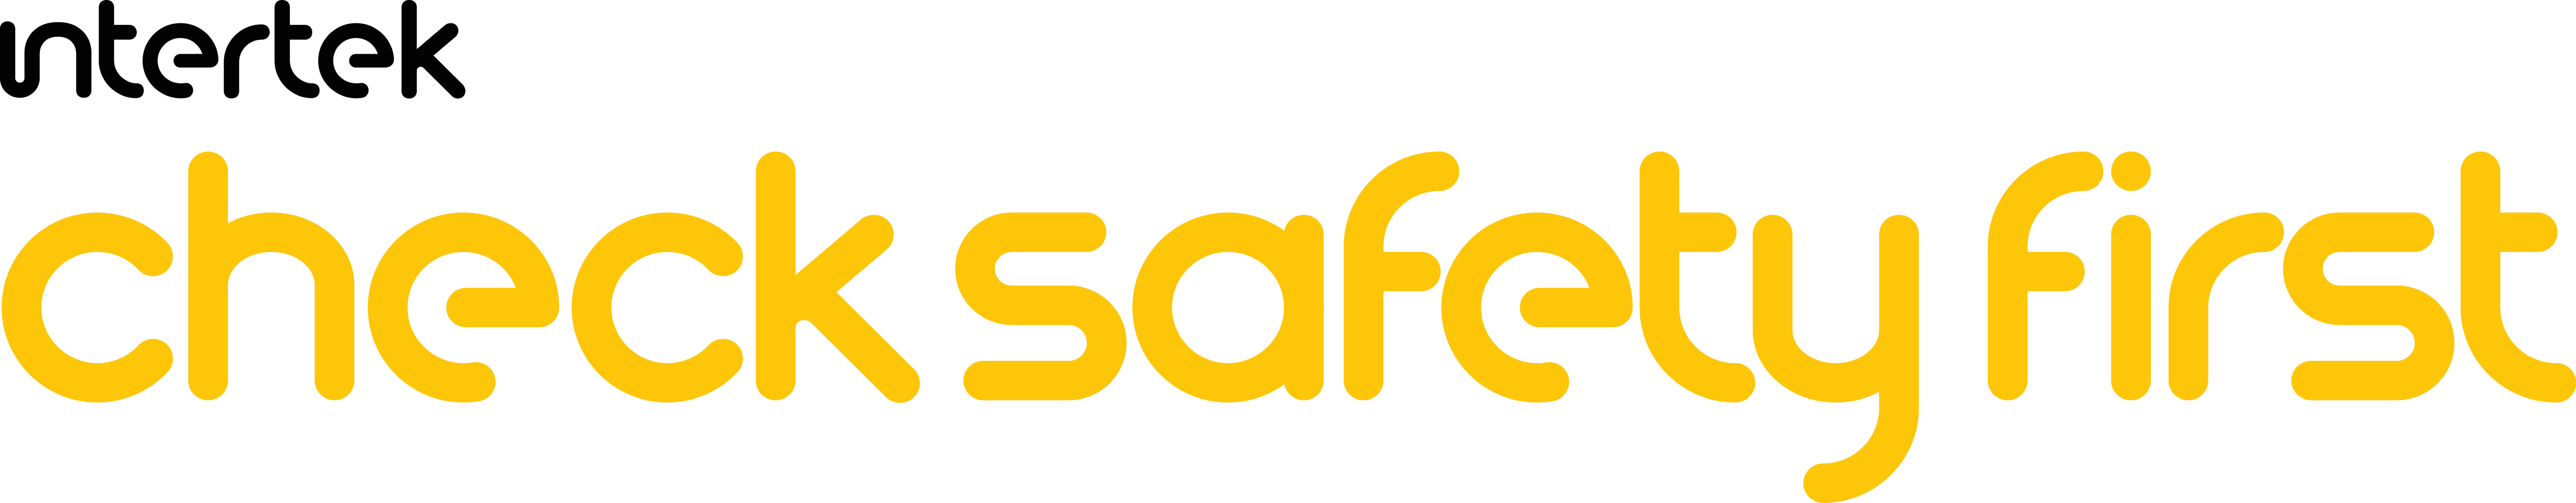 Check Safety First Limited Logo